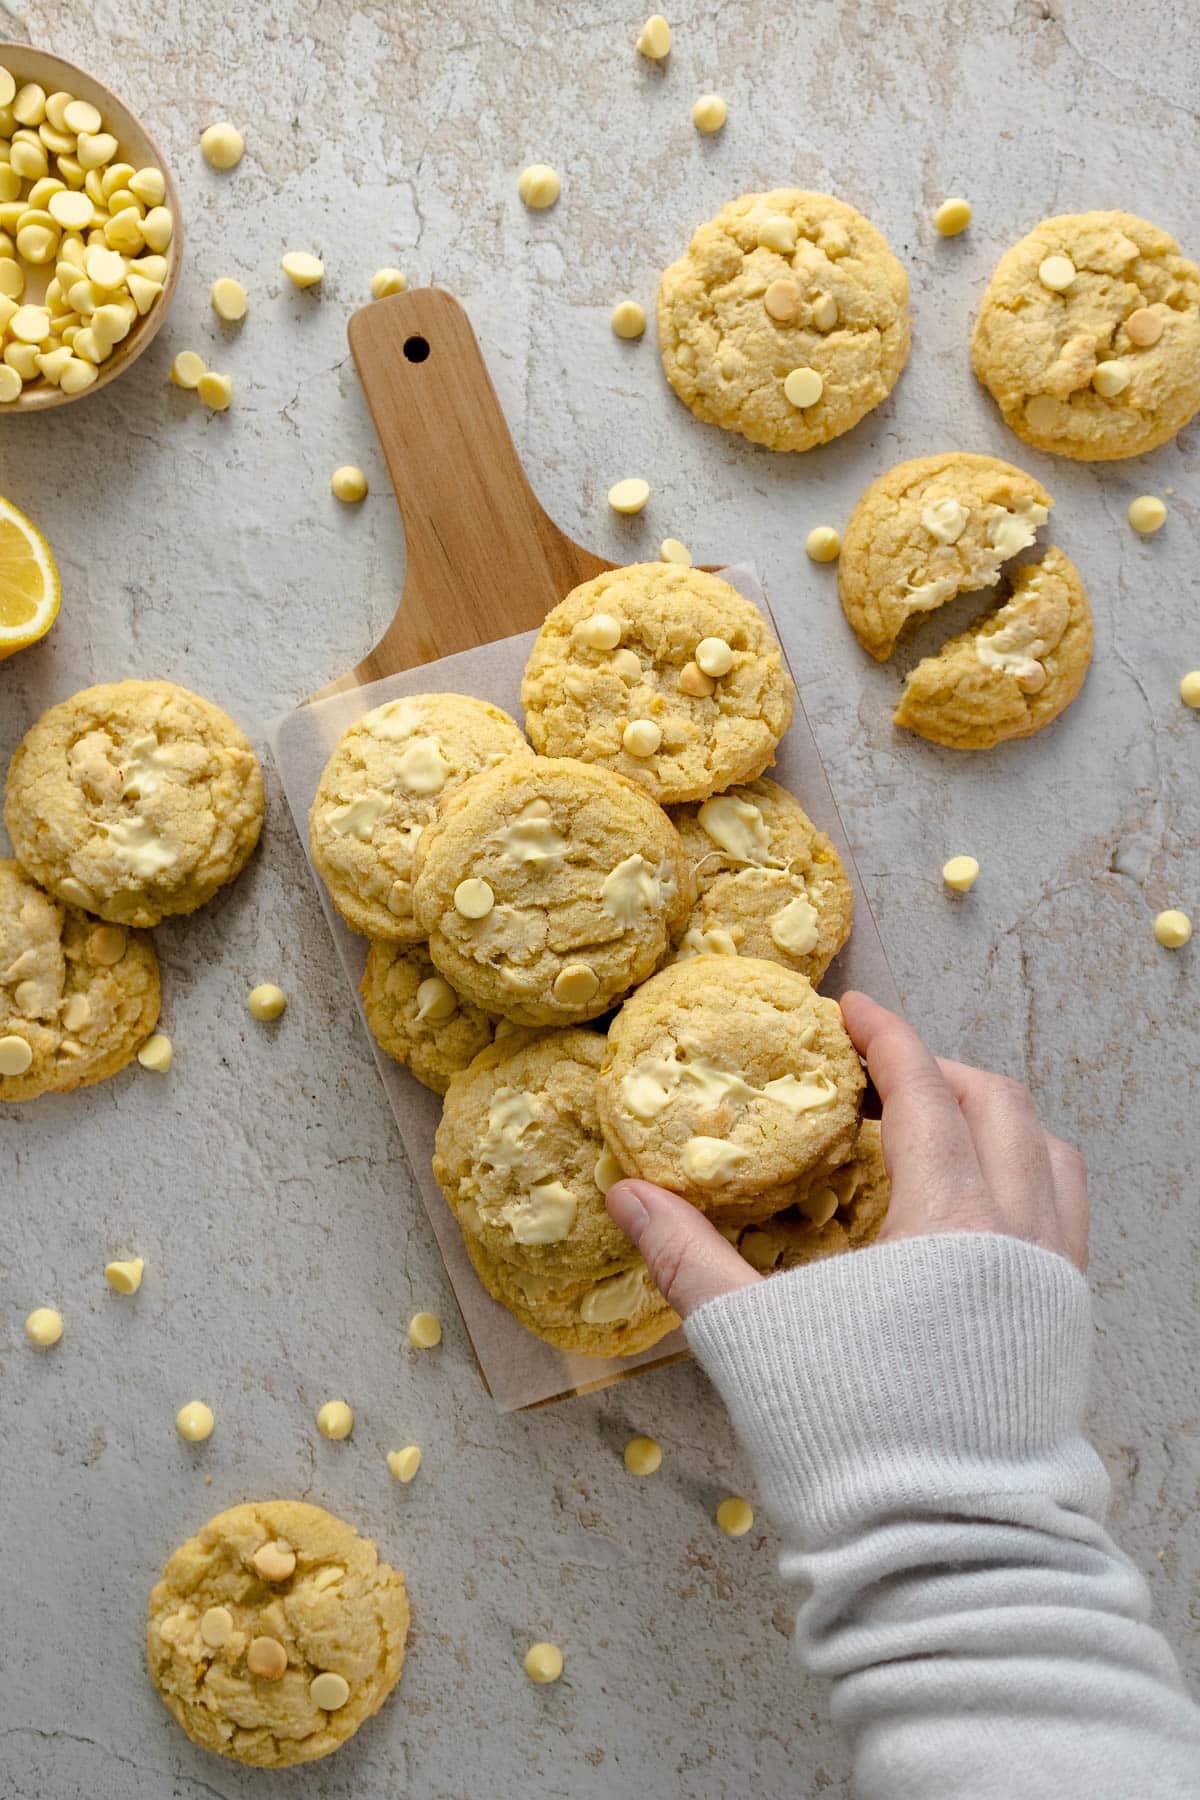 Lemon white chocolate cookies arranged on a platter with a hand picking up a cookie.